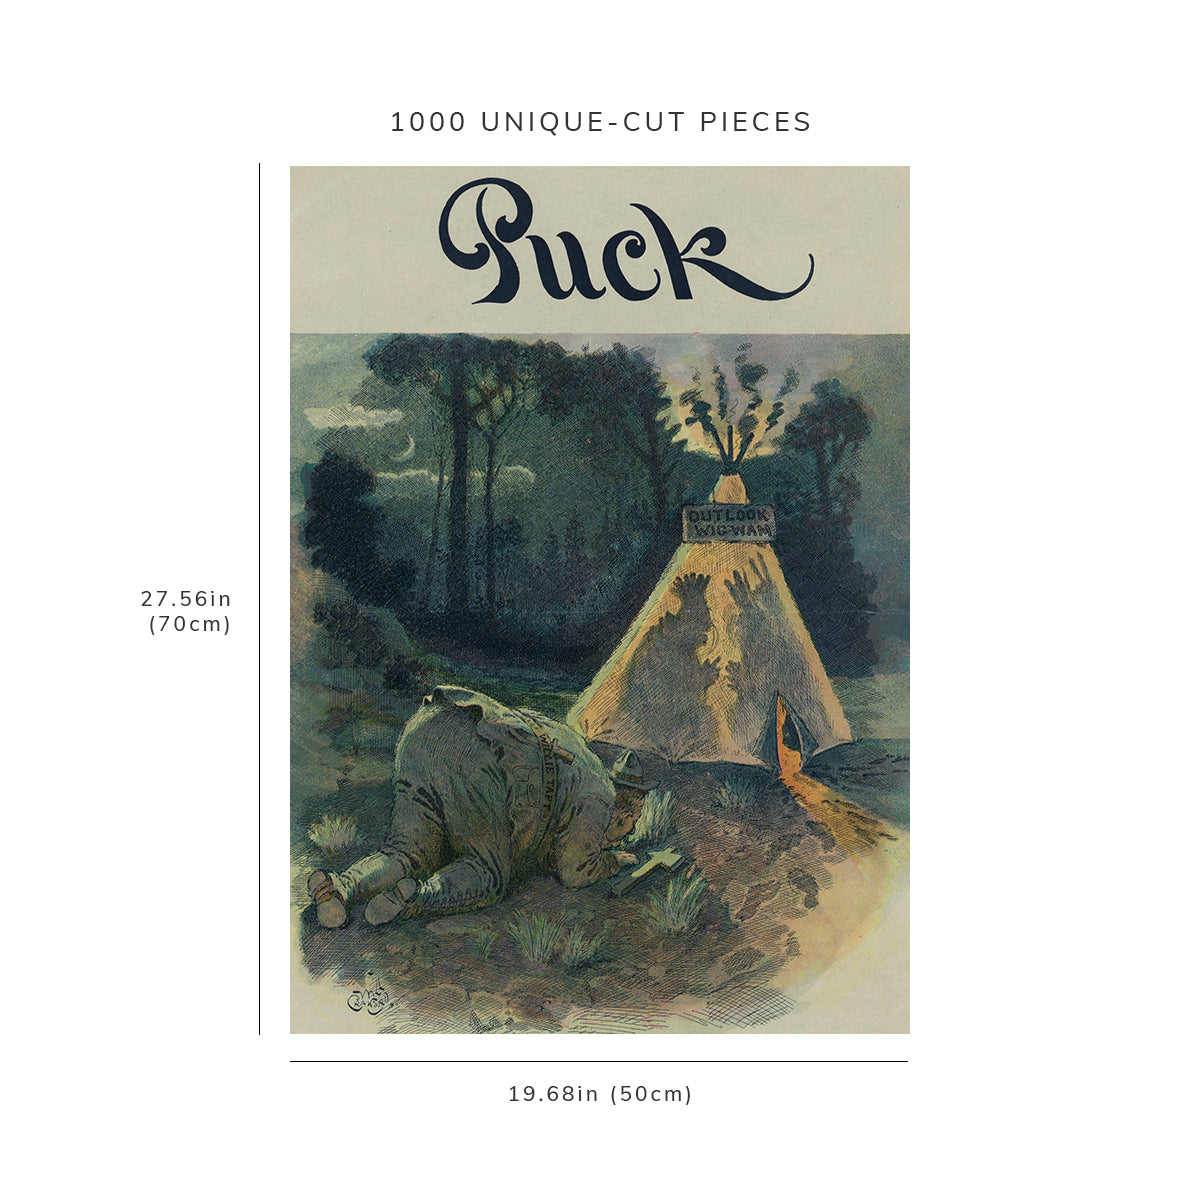 1000 piece puzzle - 1912 | Photo of Puck | The Boy Scout | Will Crawford | President Taft | Tipi | Wig-Wam